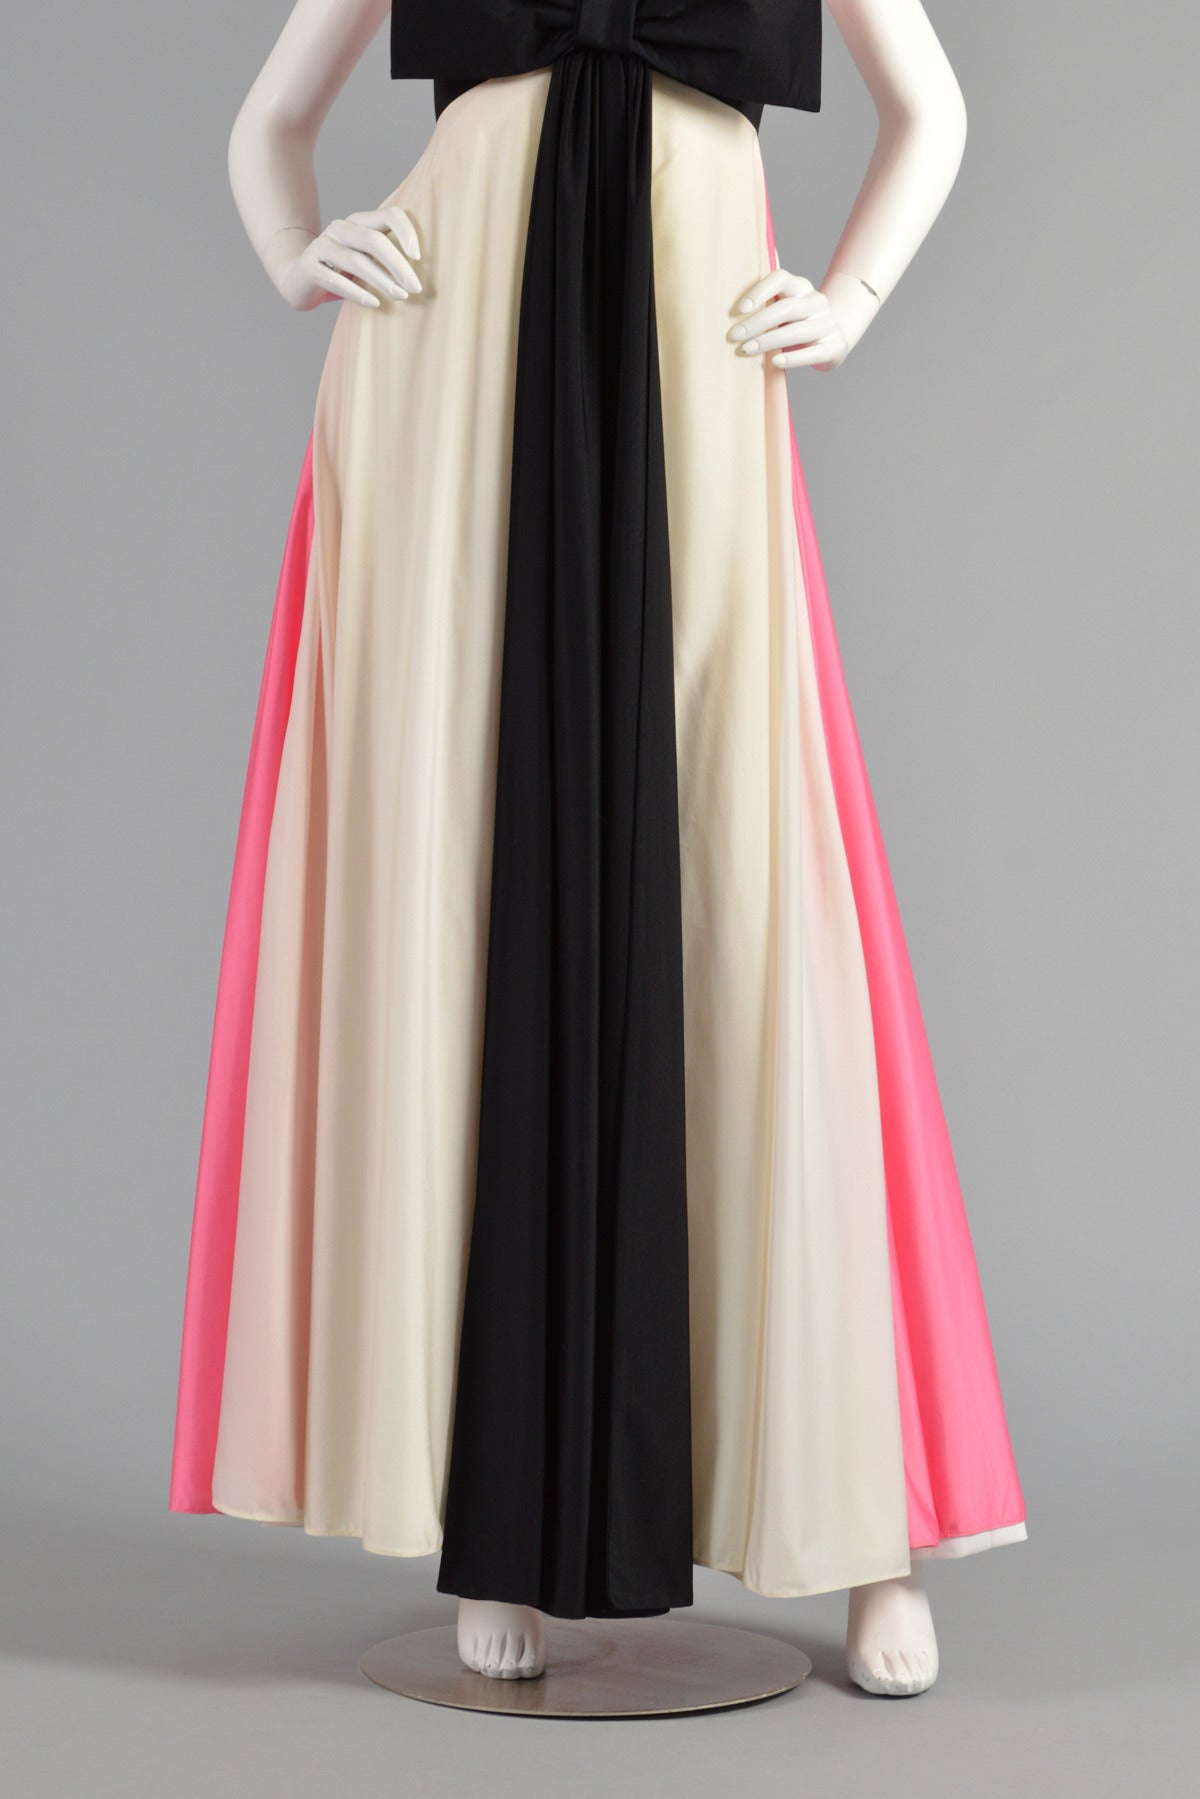 Les Wilk 1970's Colorblock Evening Gown with Massive Bow For Sale 2